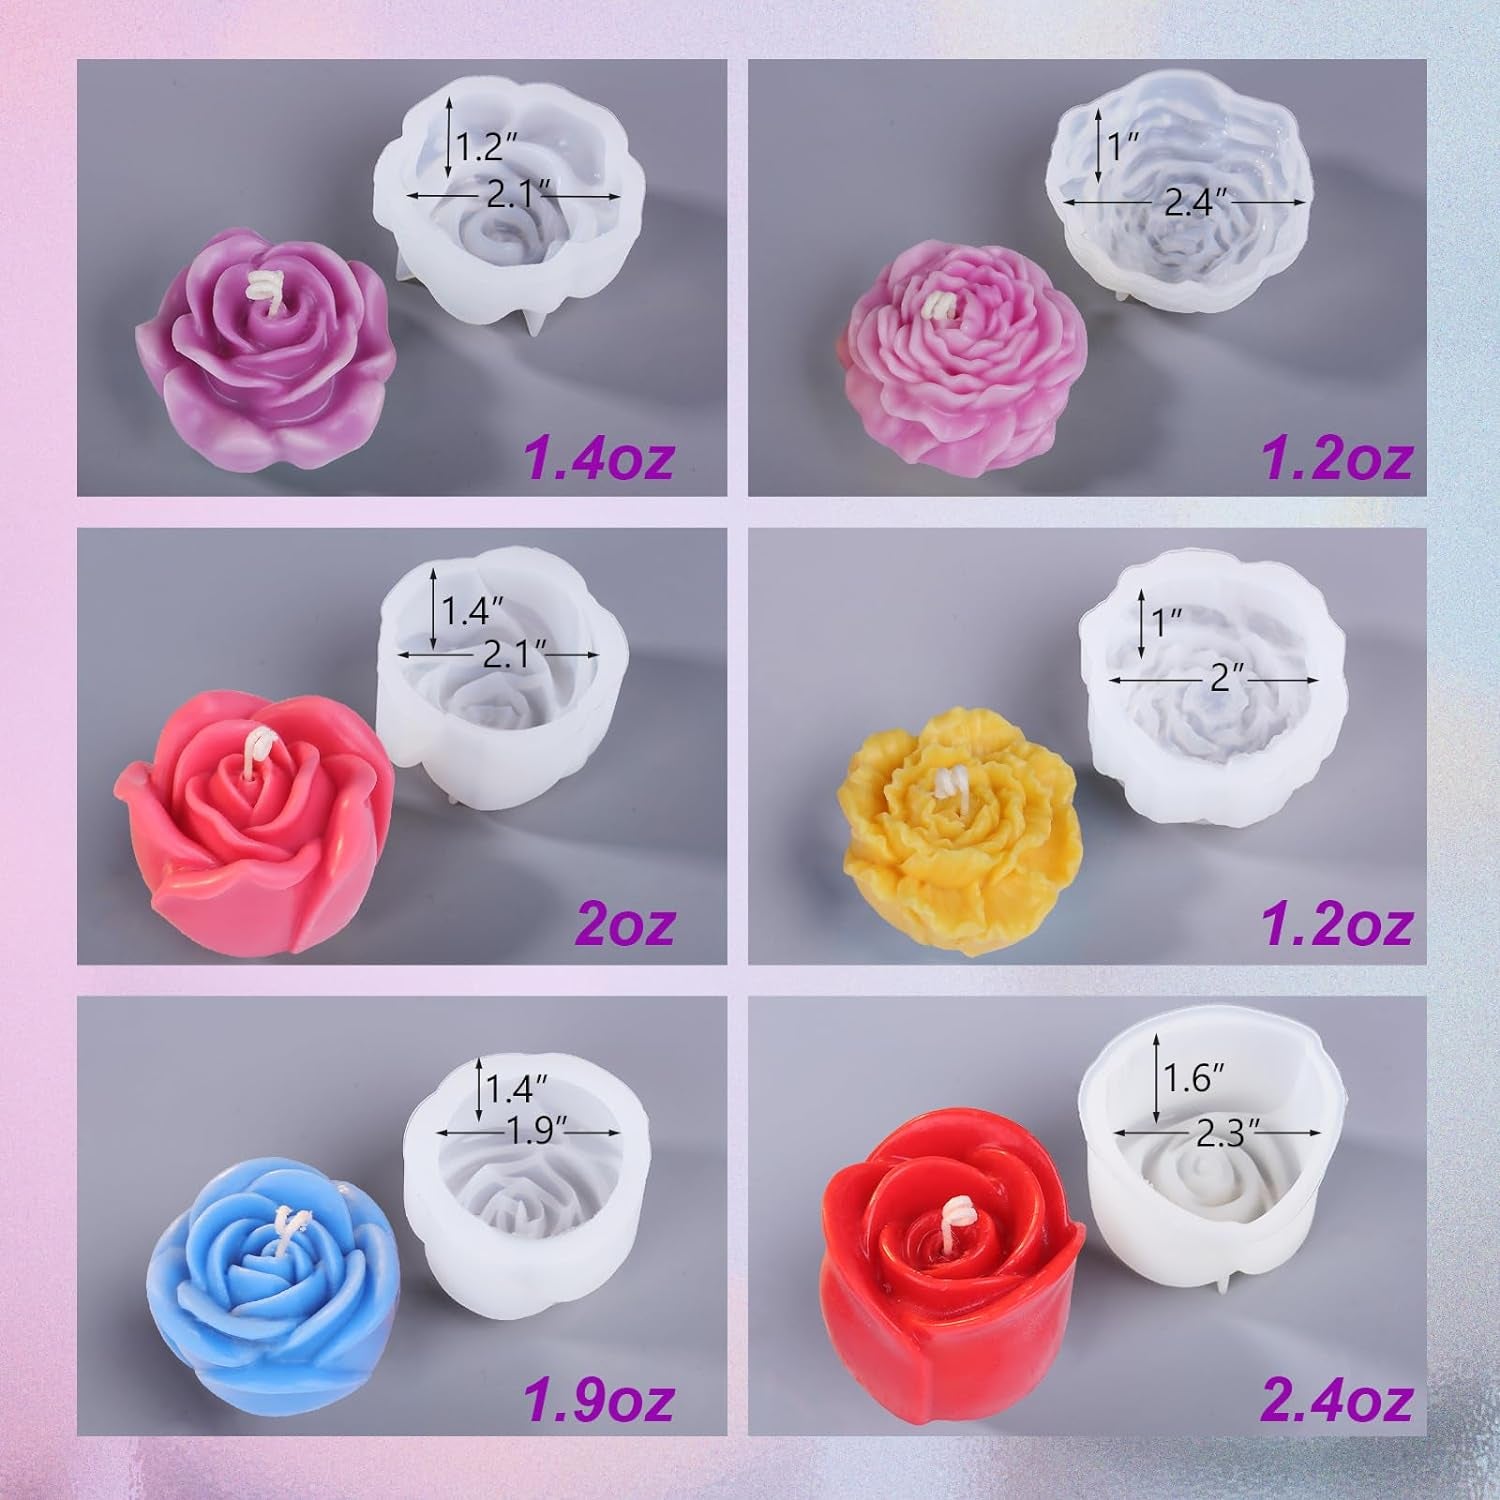 Flower Molds for Candle Making, Flower Candle Making Molds Including 6 PCS Flower Silicone Candle Mold, Silicone Molds for Soy Wax, Beeswax, Candle Making, Resin Craft